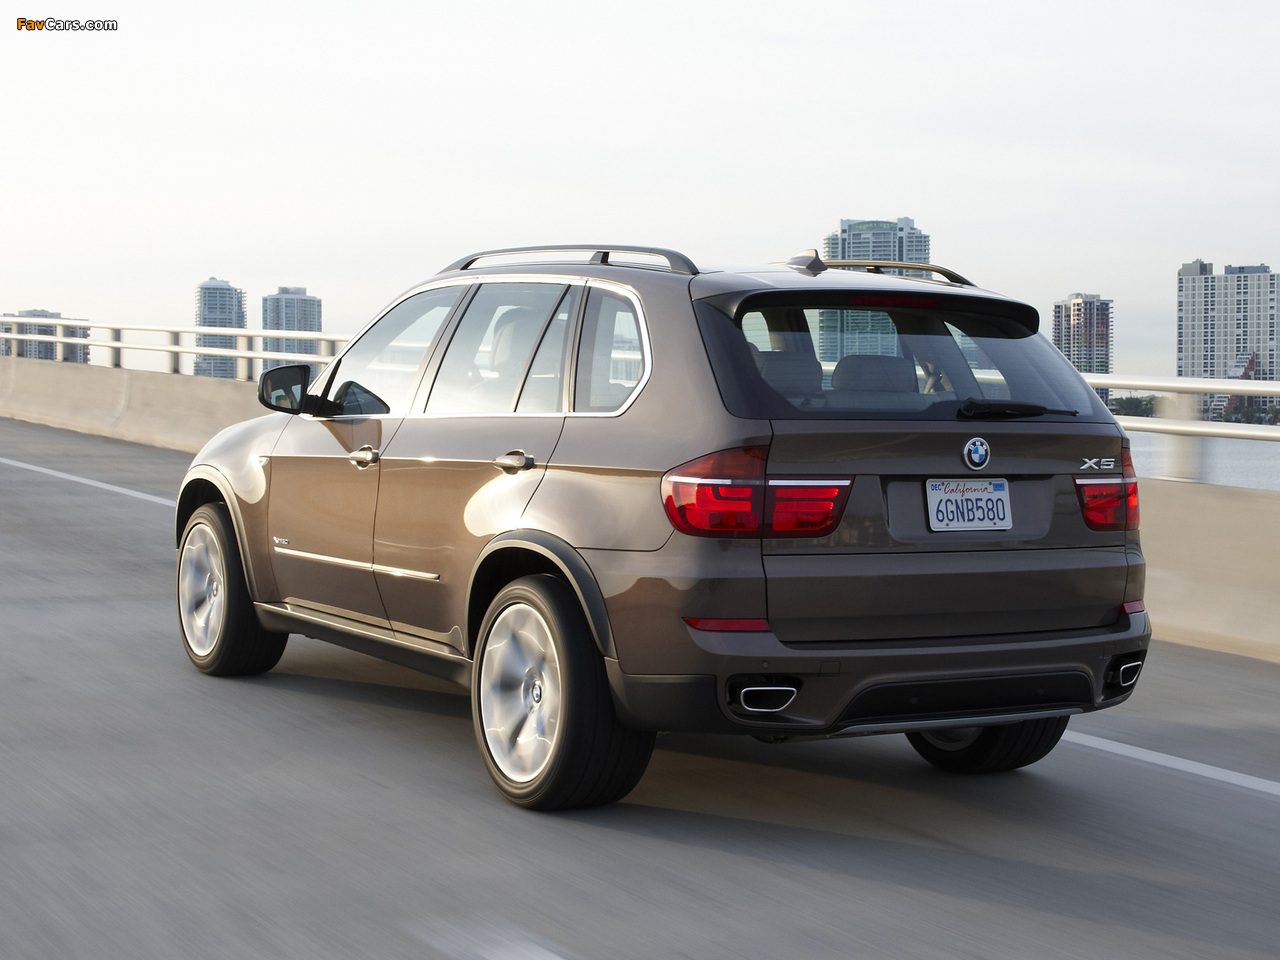 BMW X5 xDrive50i (E70) 2010 pictures (1280 x 960)